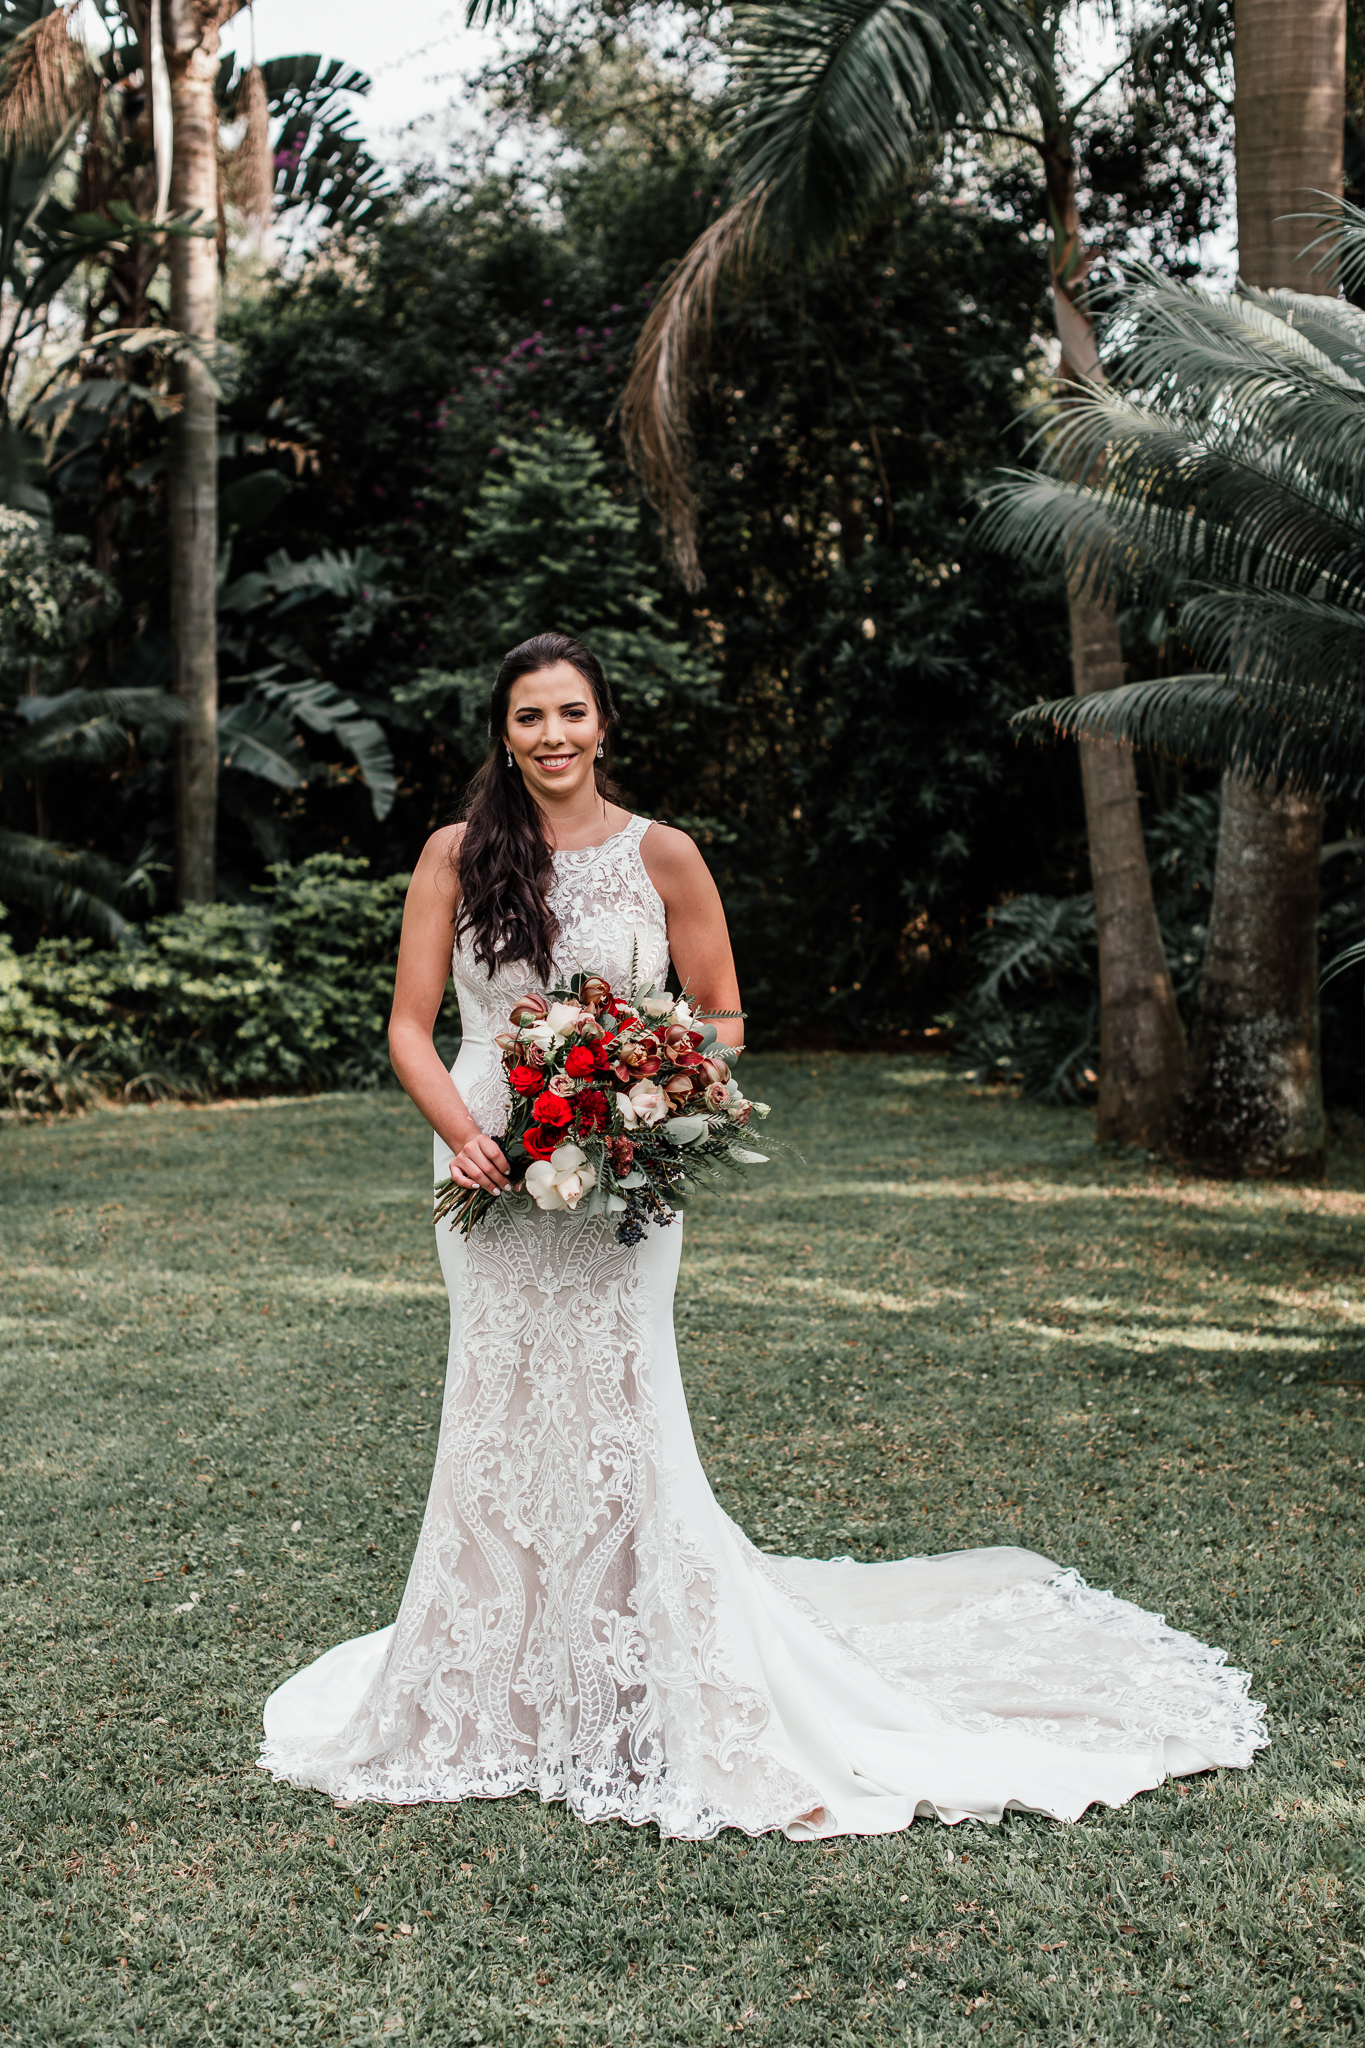 Bride Wearing A Sexy Wedding Dress Called Kevyn By Sottero And Midgley With Red Florals